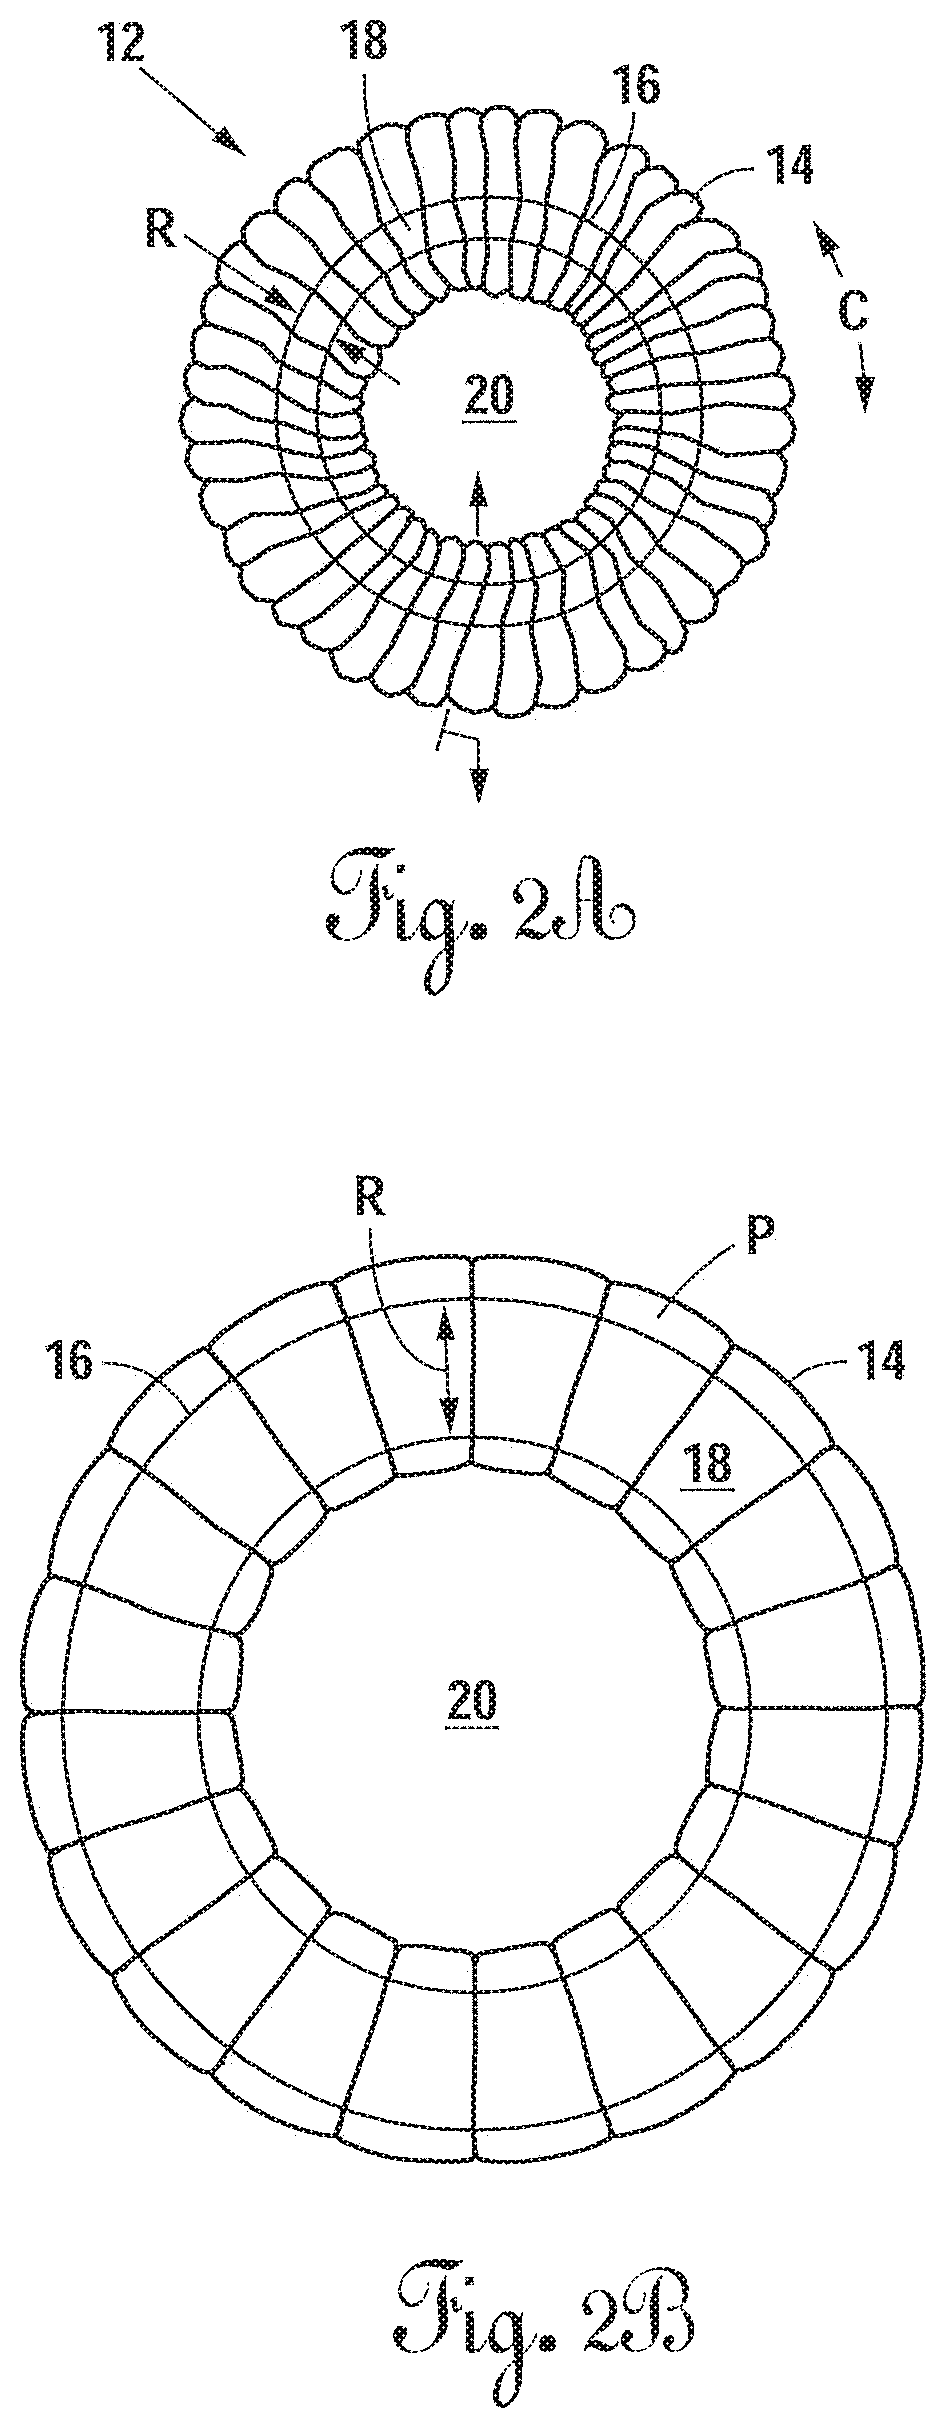 Radially expandable annulus reinforcement prosthesis